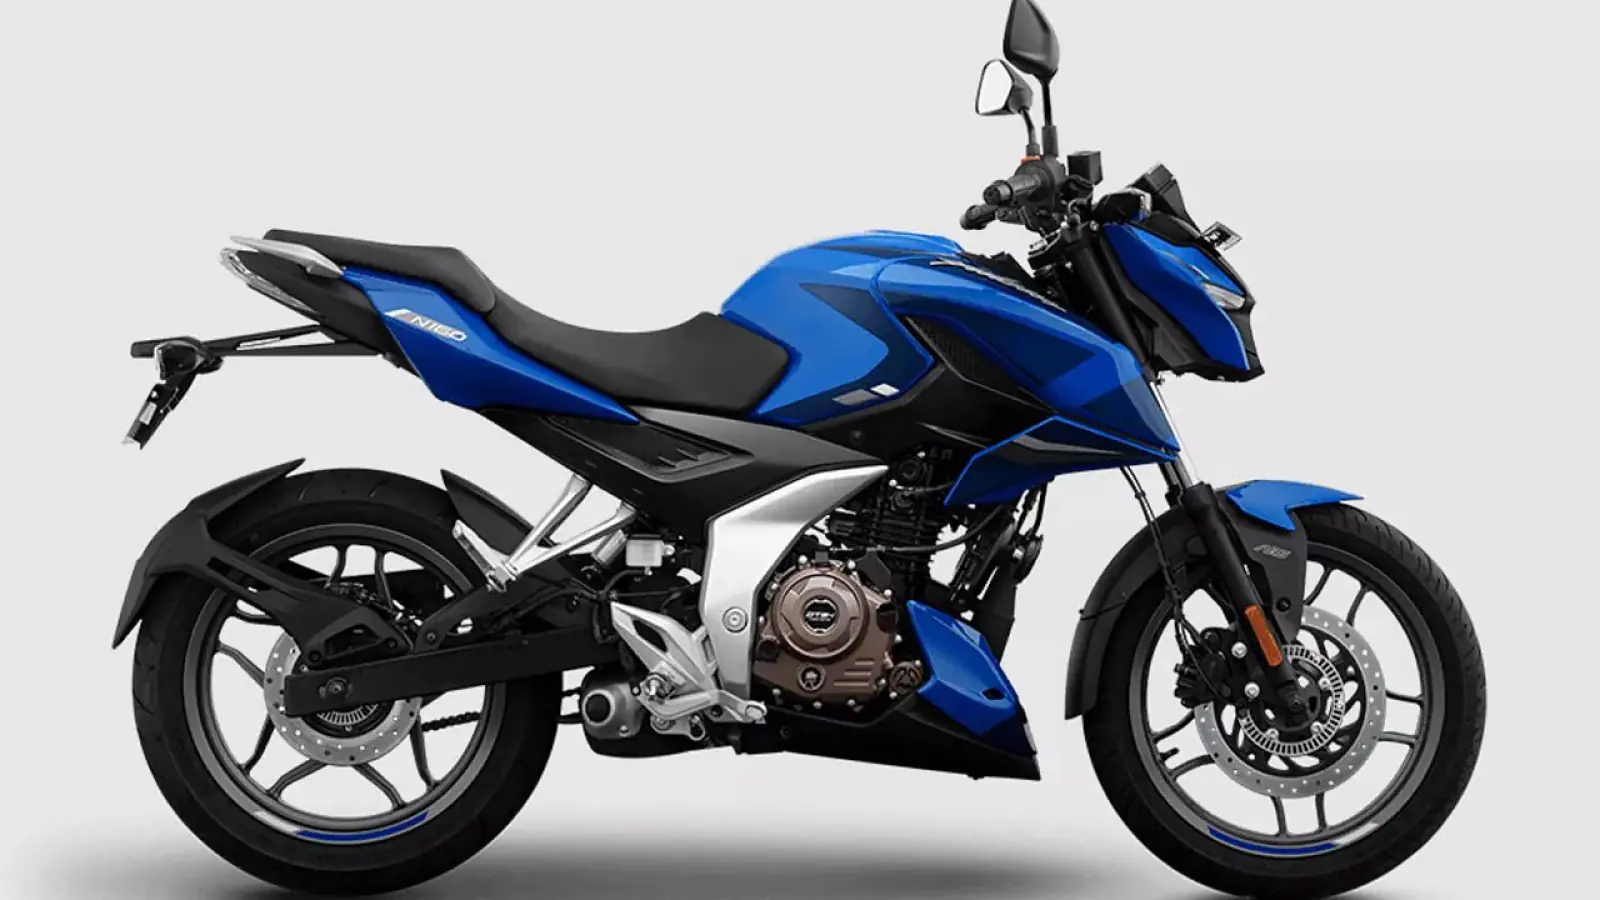 With these modifications, the 2024 Bajaj Pulsar N160 will soon be launched and begin to arrive at dealerships